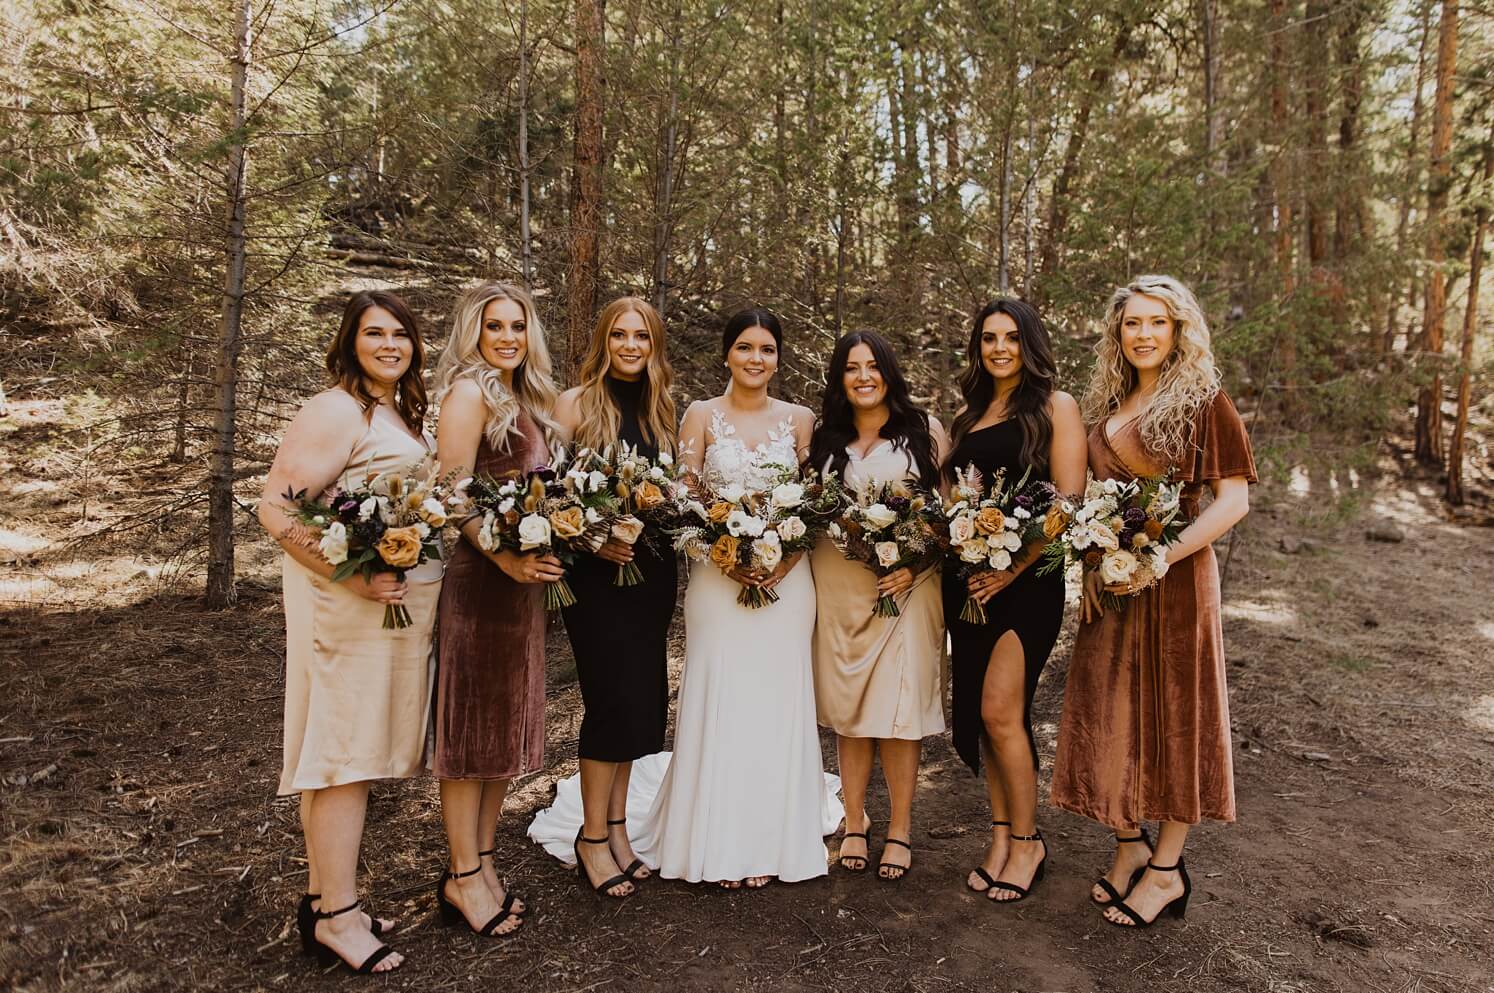 Bride with bridesmaids in shades of brown at Evergreen wedding venue | McArthur Weddings and Events